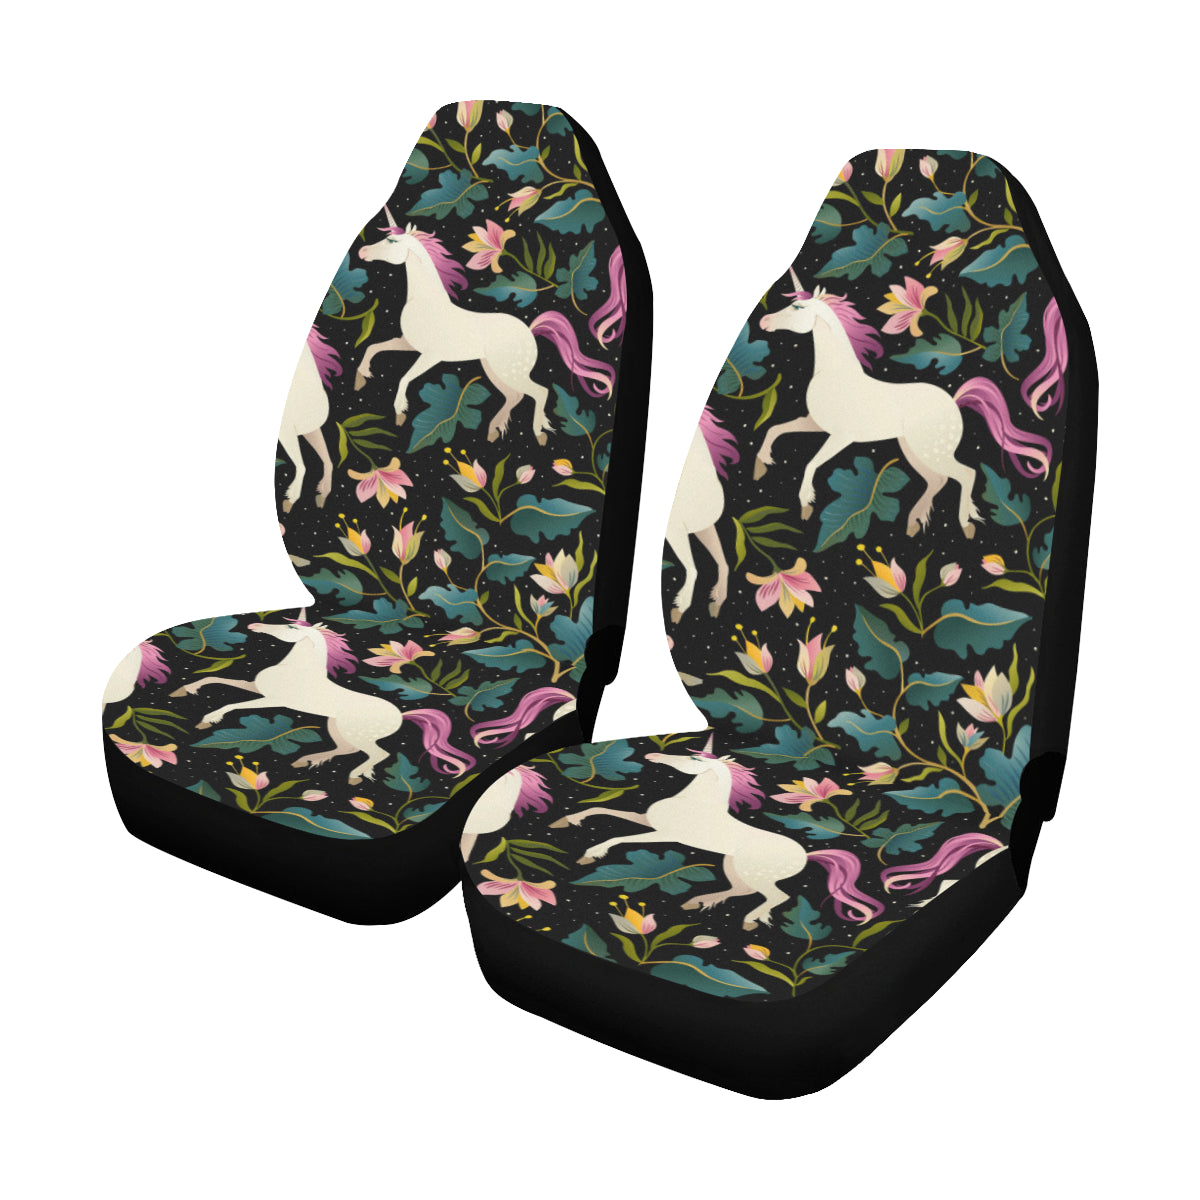 Car Seat covers for Women, Unicorn Purple Seat Cover 2 pc, Cute Horse Flowers Front Seat Covers, Car SUV Vans Seat Protector Accessory Starcove Fashion